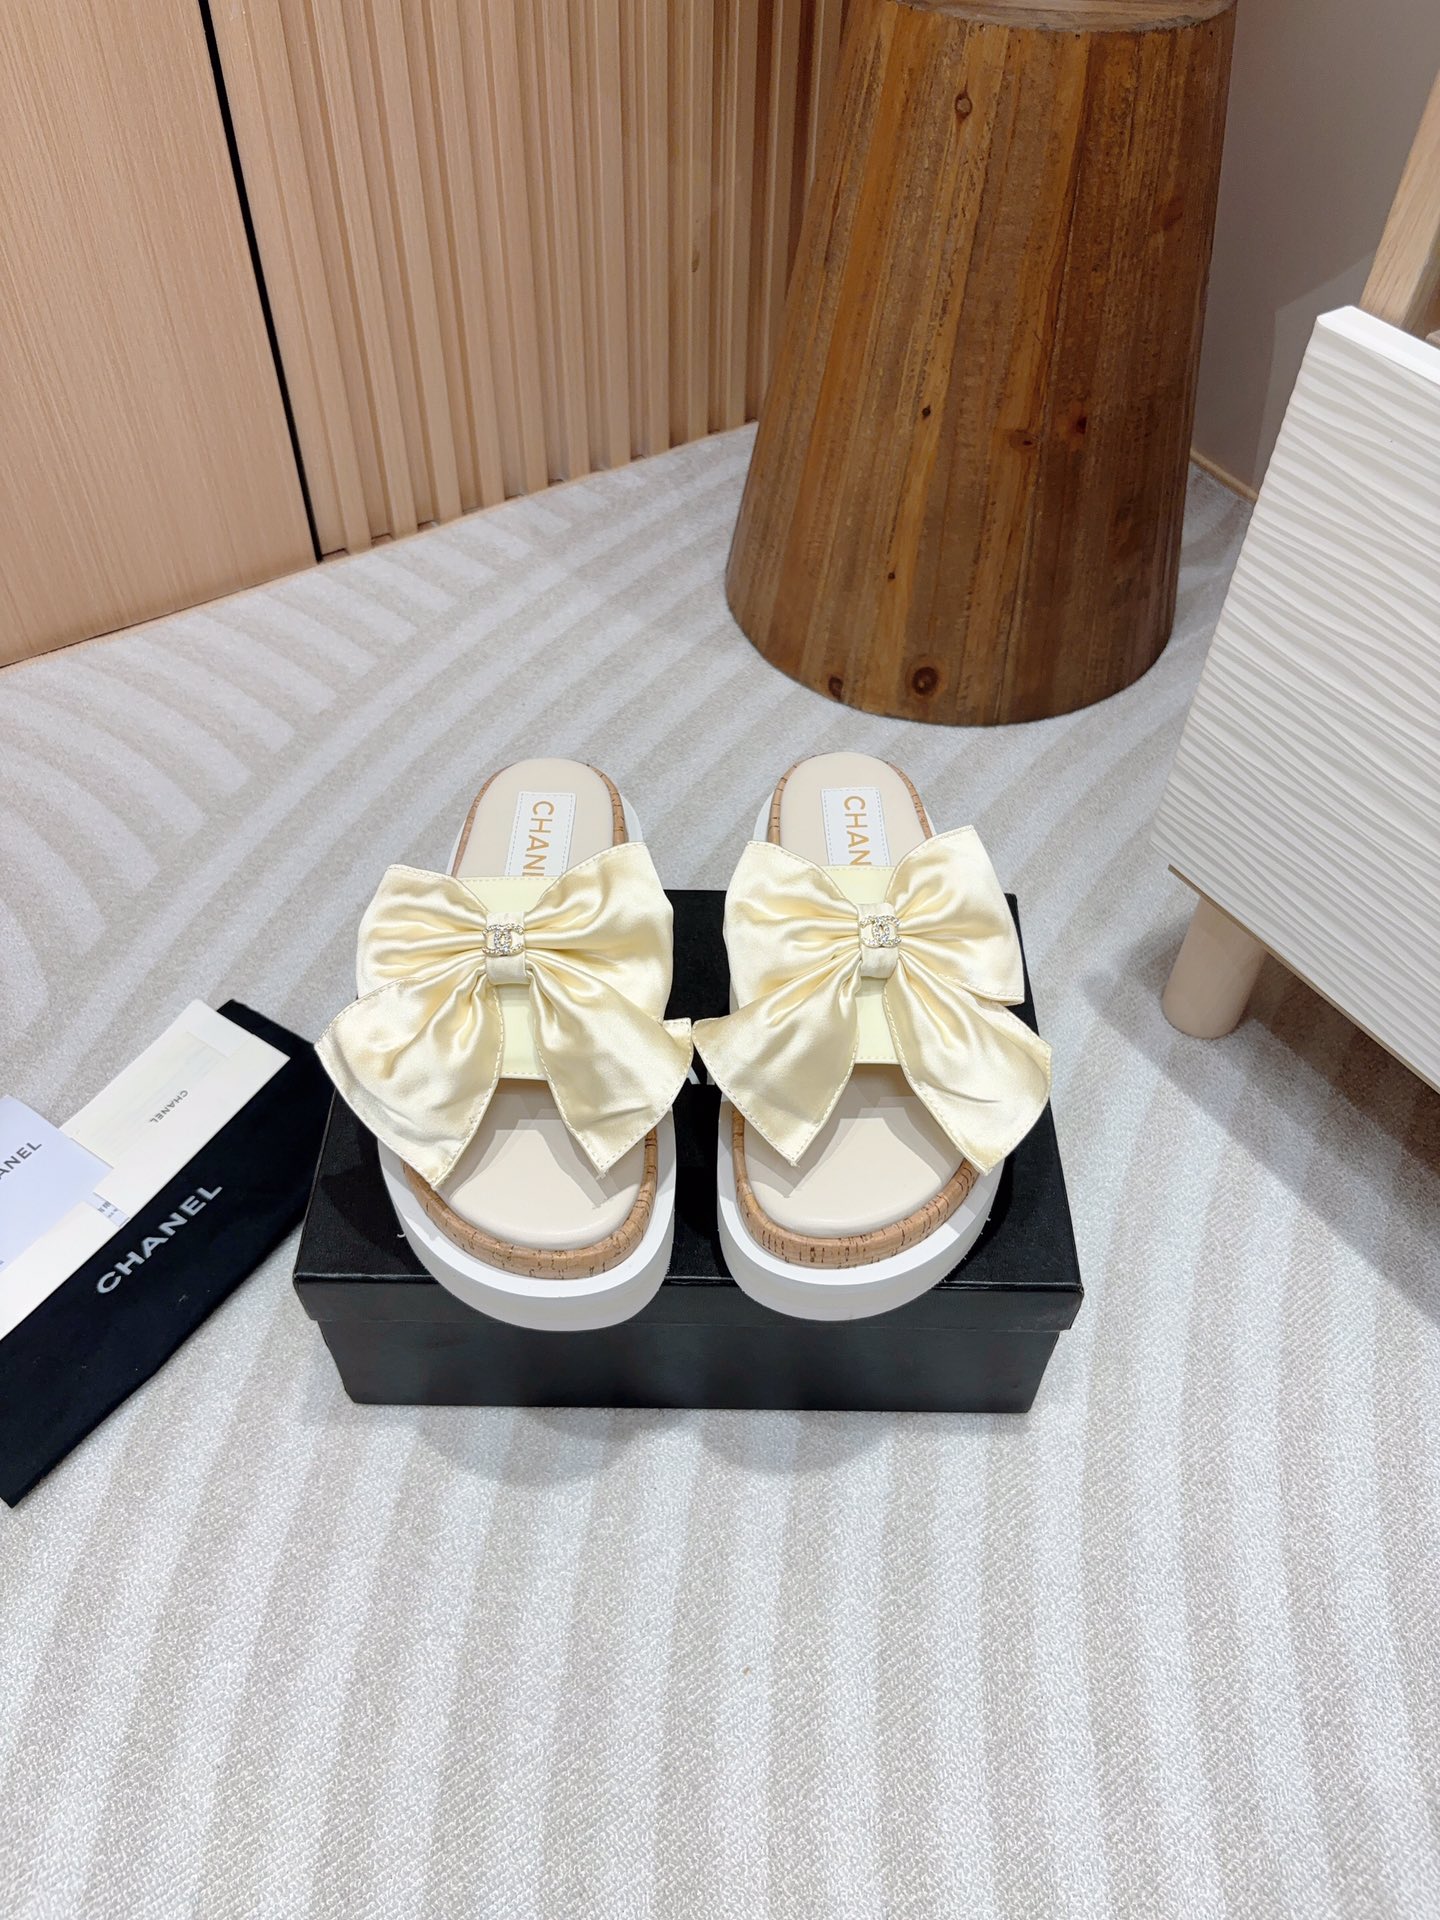 Chanel Shoes Slippers White Genuine Leather Lambskin Sheepskin Silk Spring/Summer Collection